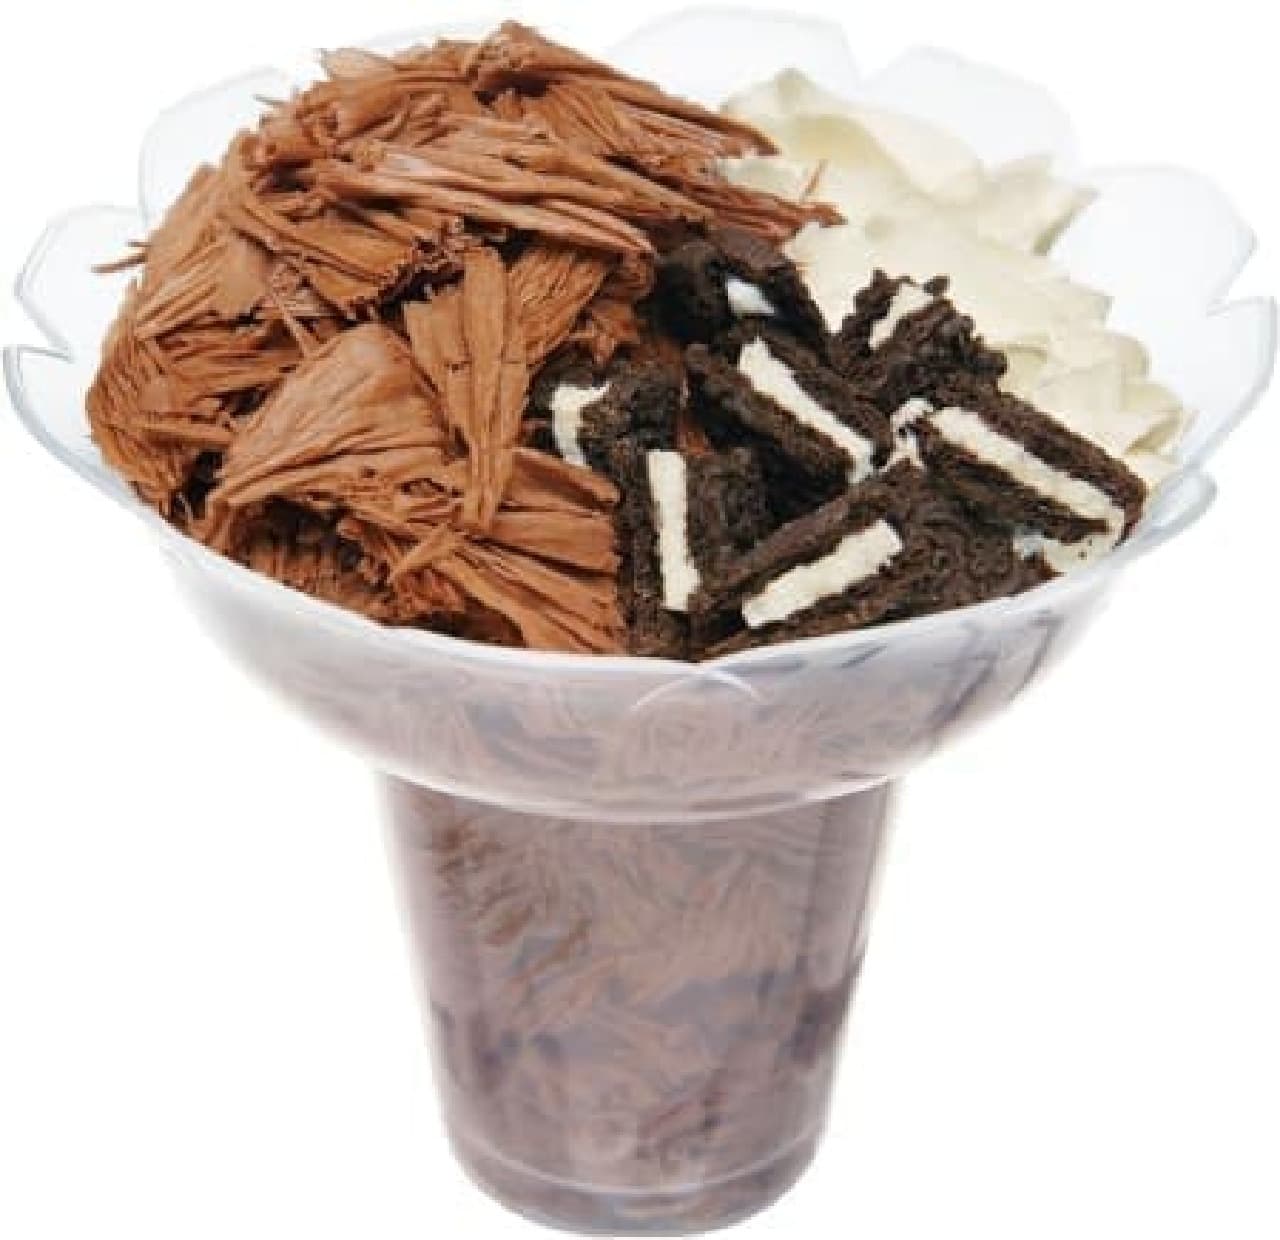 New flavors are also available this year! (The photo is chocolate cookie & whipped cream)